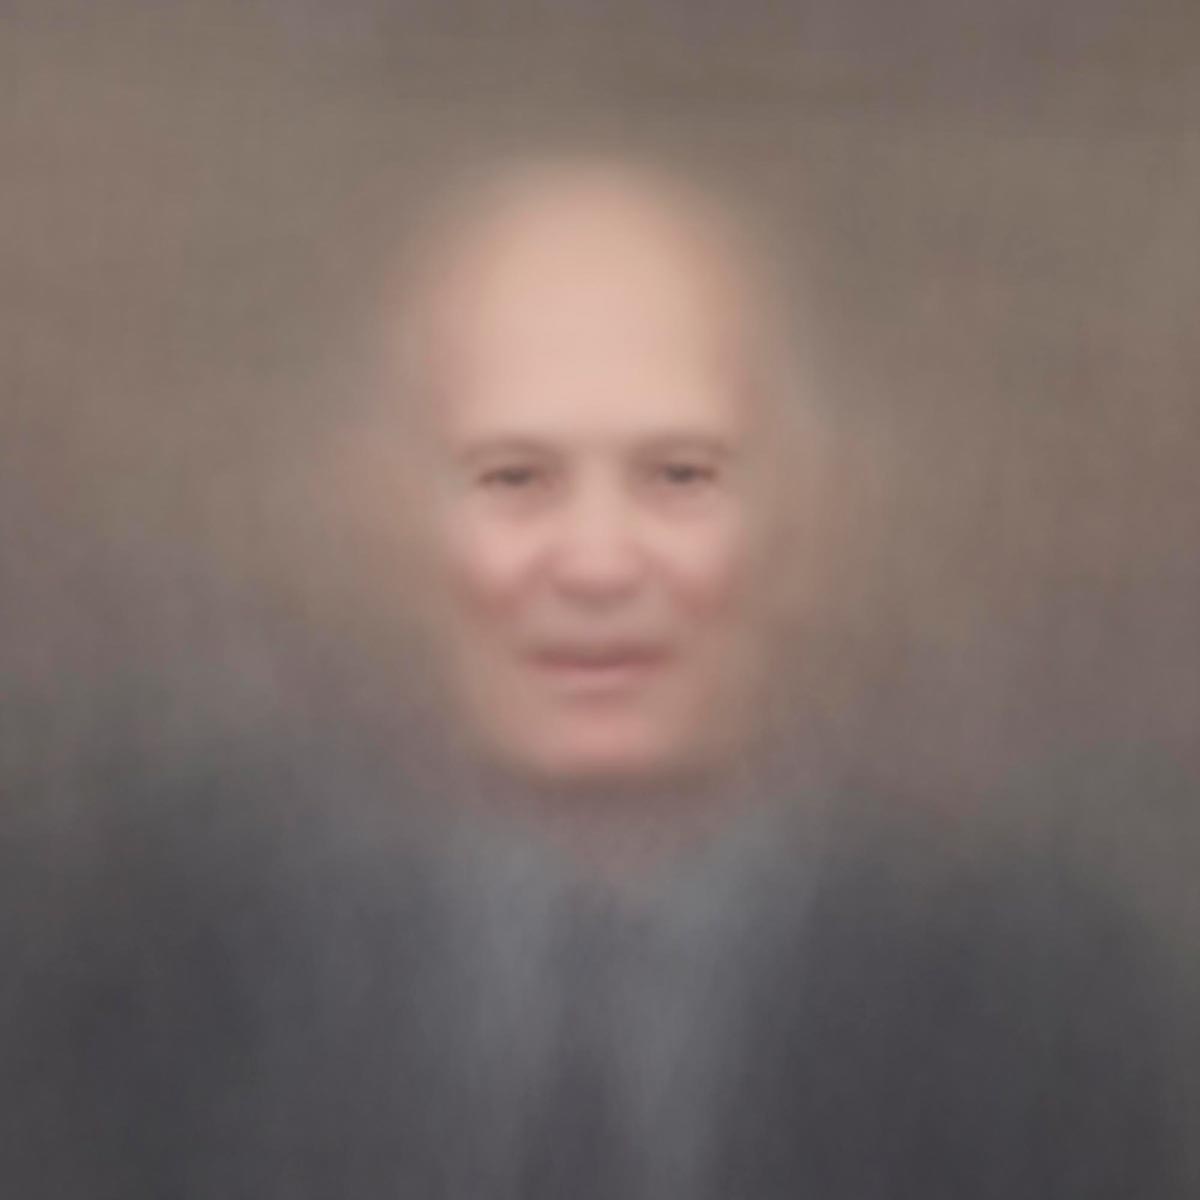 MELNIKOFF Digest ™ The Genius. The first photographic portrait of a living human created by the Artificial Intelligence.